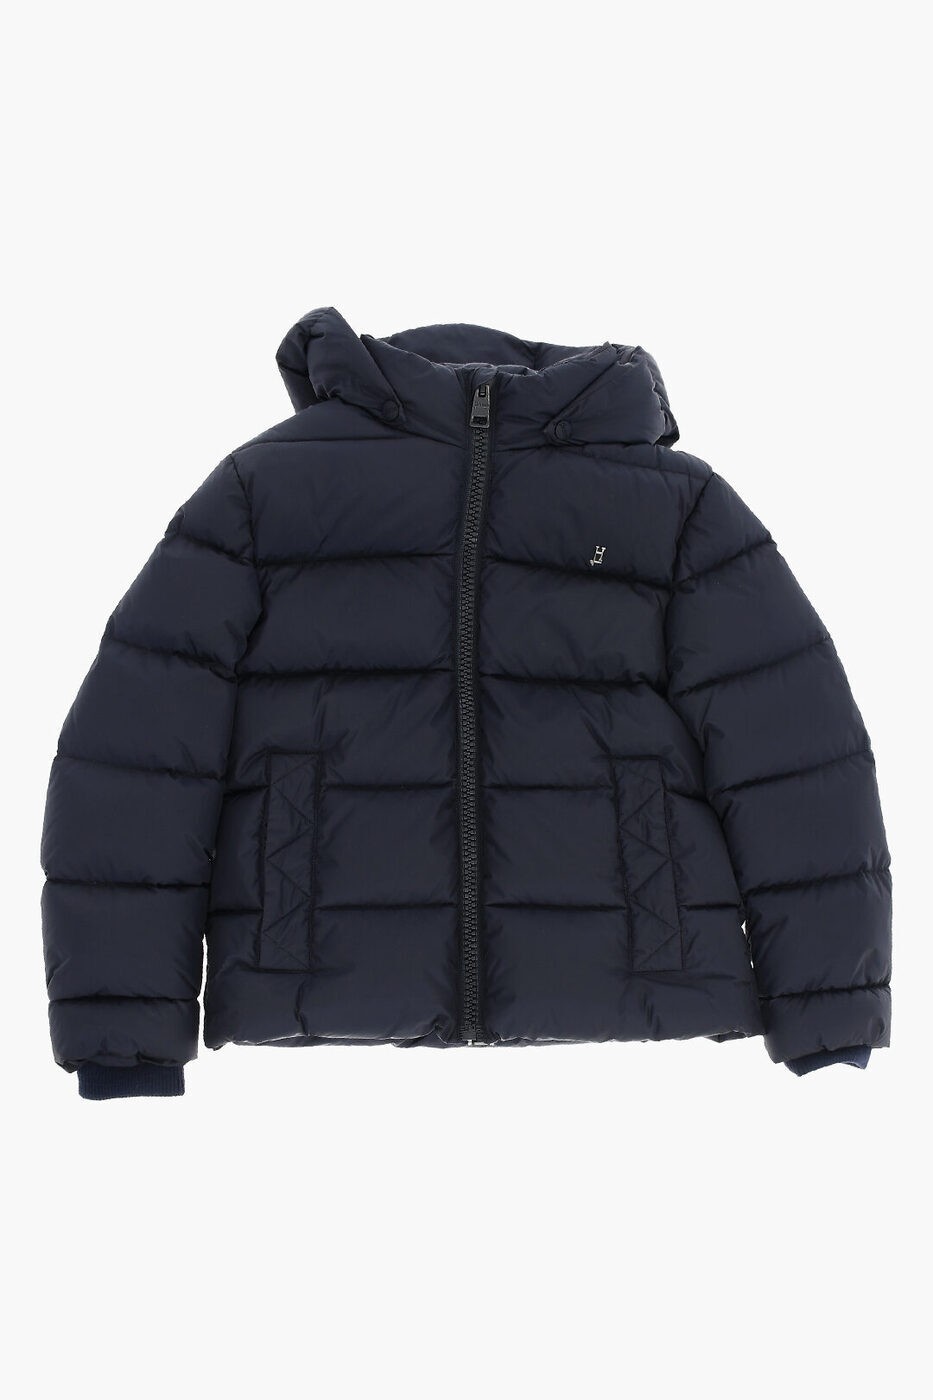 HERNO ヘルノ ジャケット PI0110B 12004 9200 ボーイズ REMOVABLE HOODED SOLID COLOR DOWN JACKET 【..